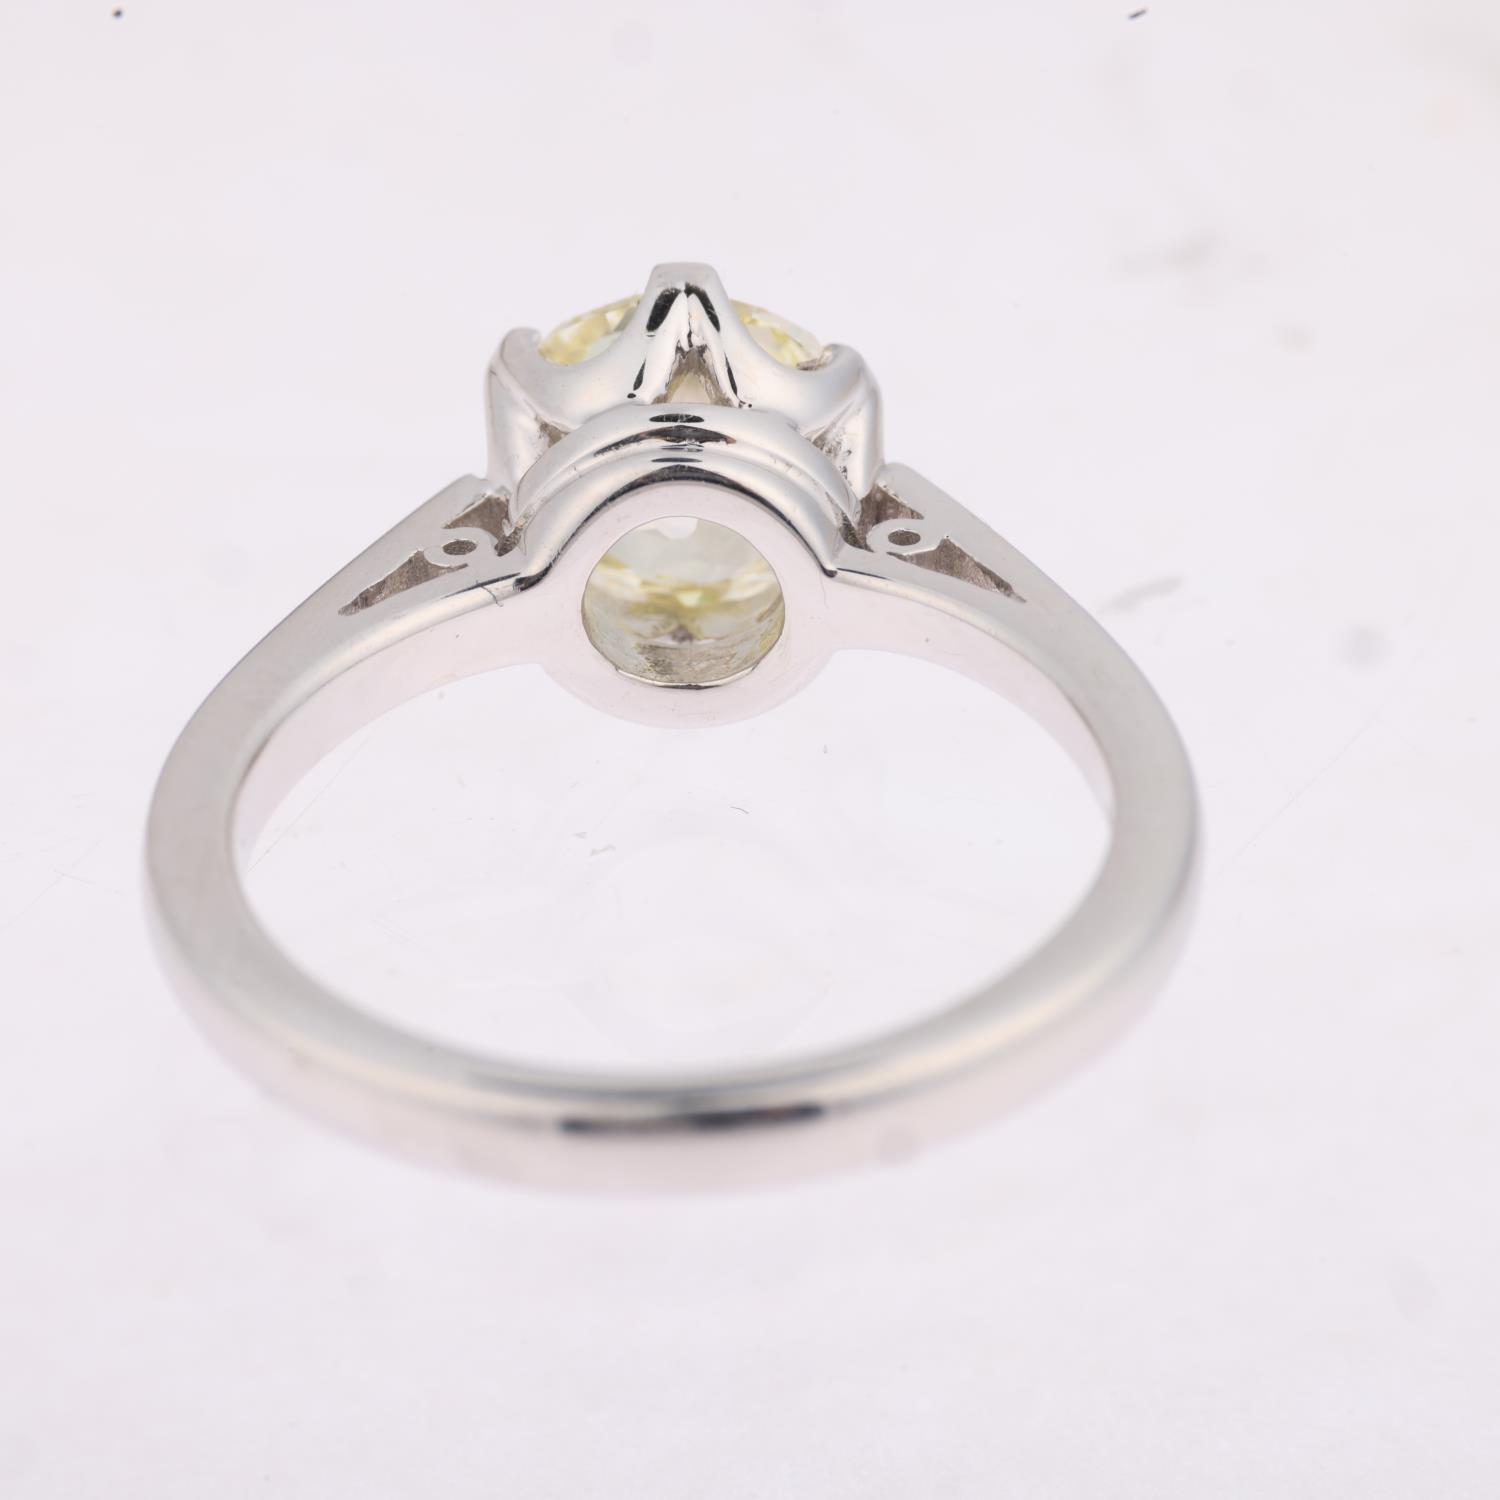 An 18ct white gold 1.9ct solitaire diamond ring, claw set with 1.9ct light yellow old-cut diamond, - Image 3 of 4